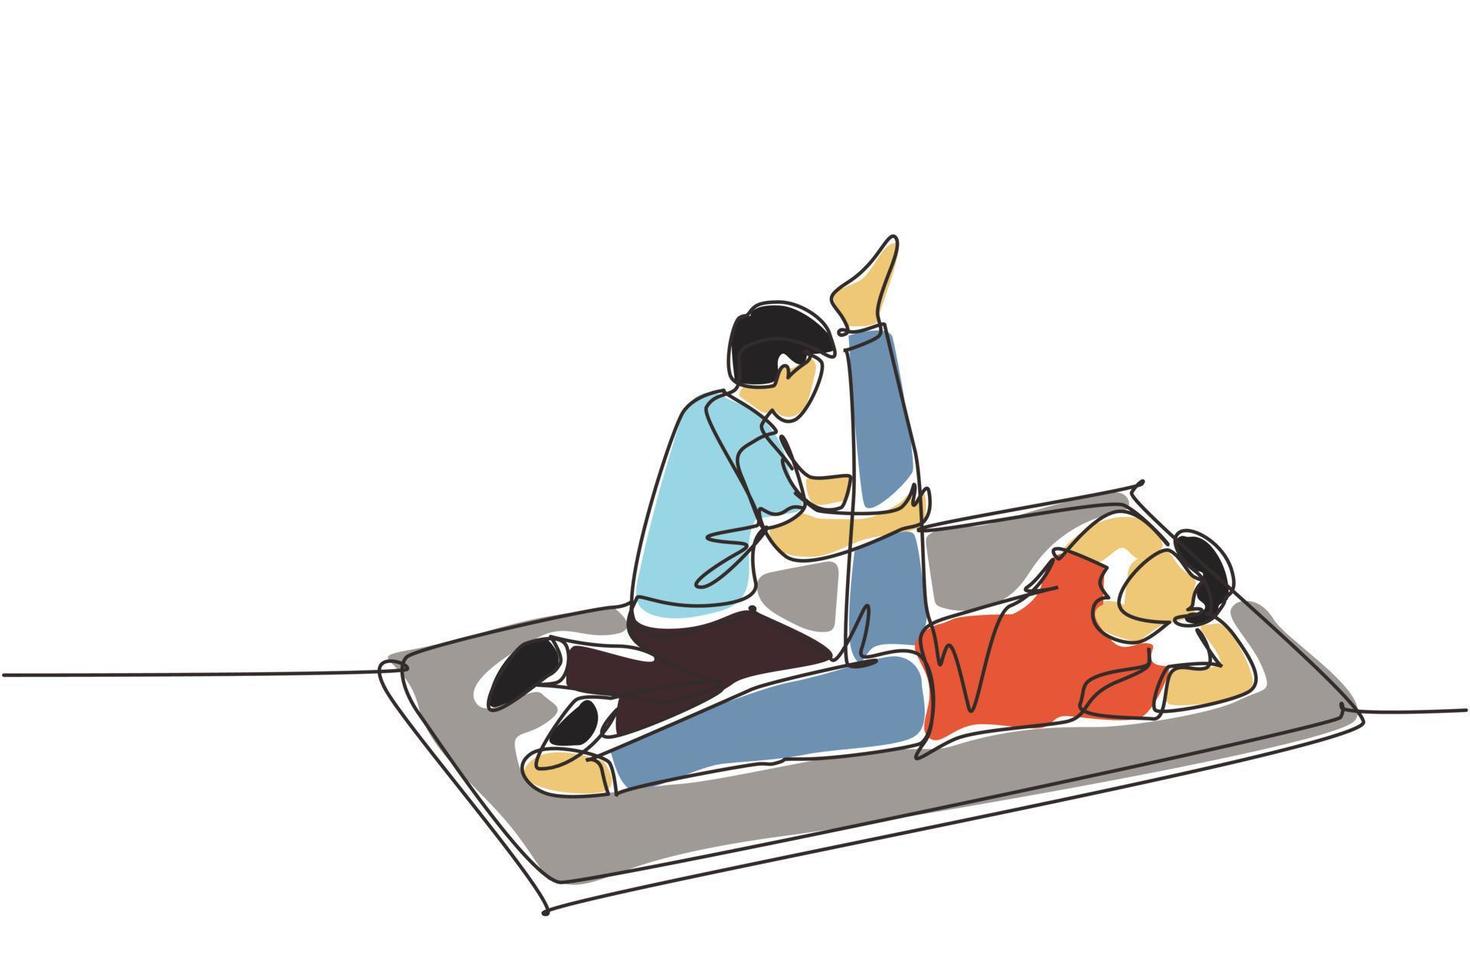 Single one line drawing rehabilitation center. Massage therapy. Male physiotherapist giving leg massage to patient lying on the floor. Modern continuous line draw design graphic vector illustration